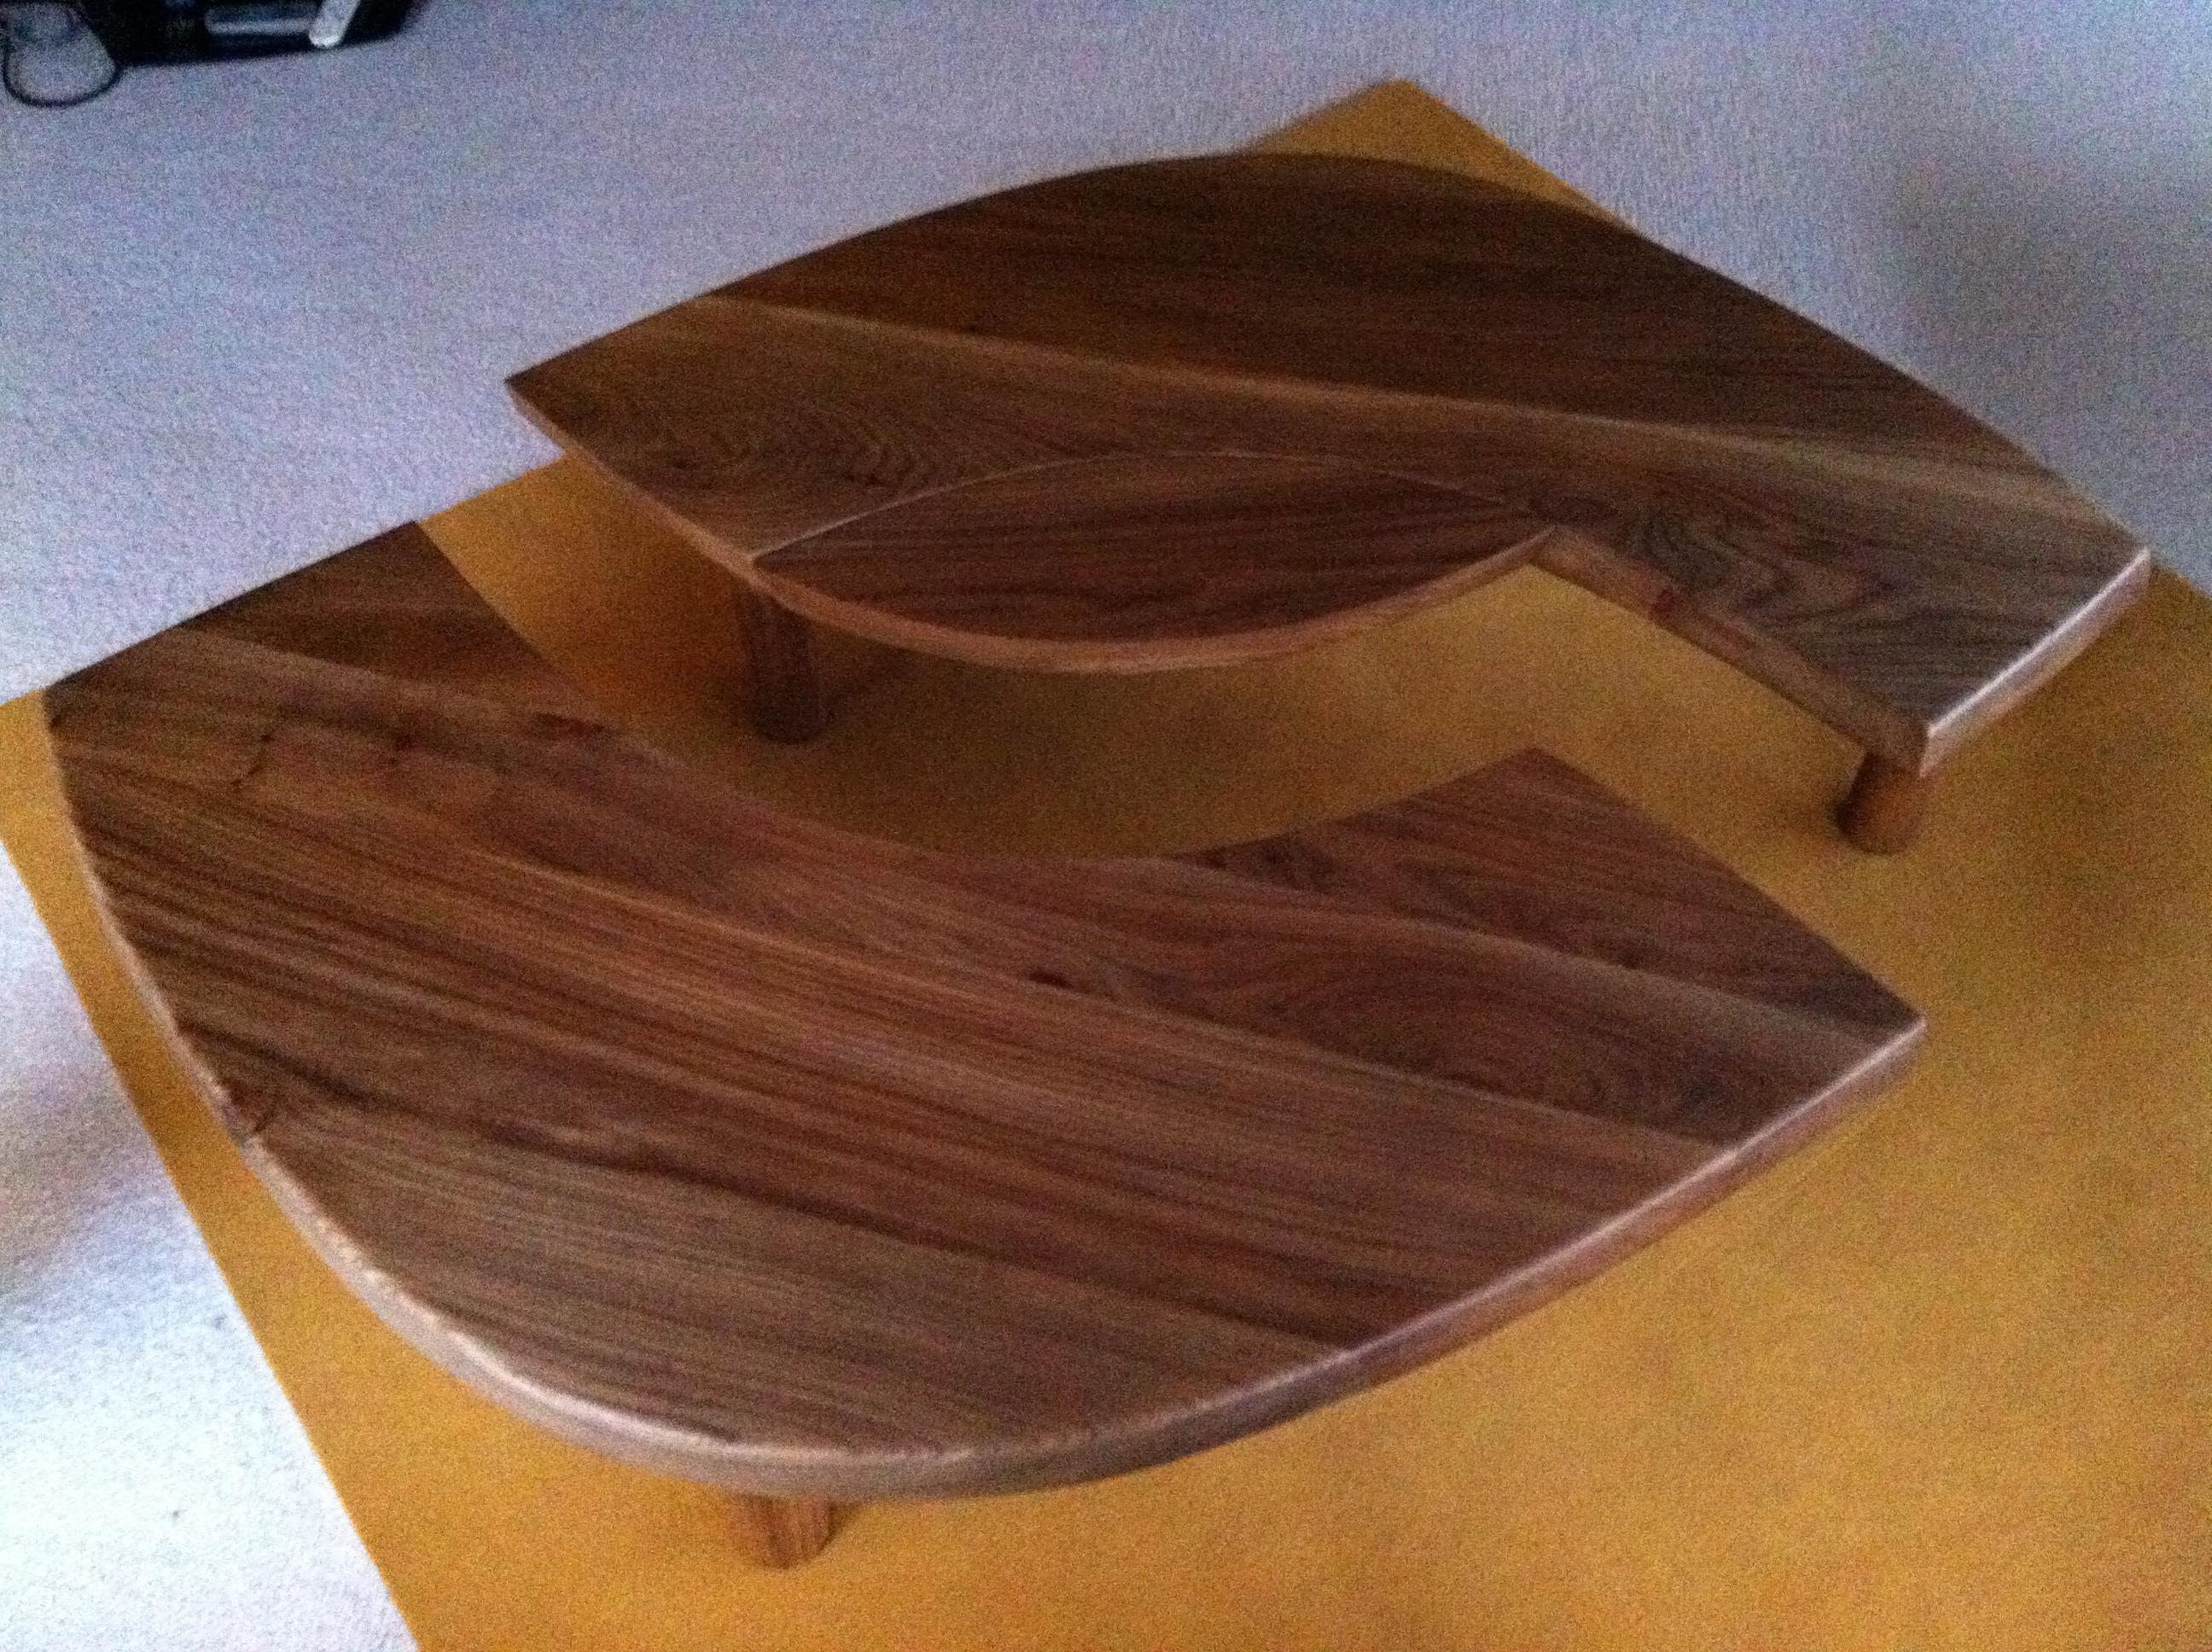 Coffee table Model 'T 22 S'
French solid elm.
Pierre Chapo workshops in Gordes (Vaucluse France) and 1 first edition
circa 1965
Measures: H 34 cm, L 175 cm, P 126 cm. Bel state of use.